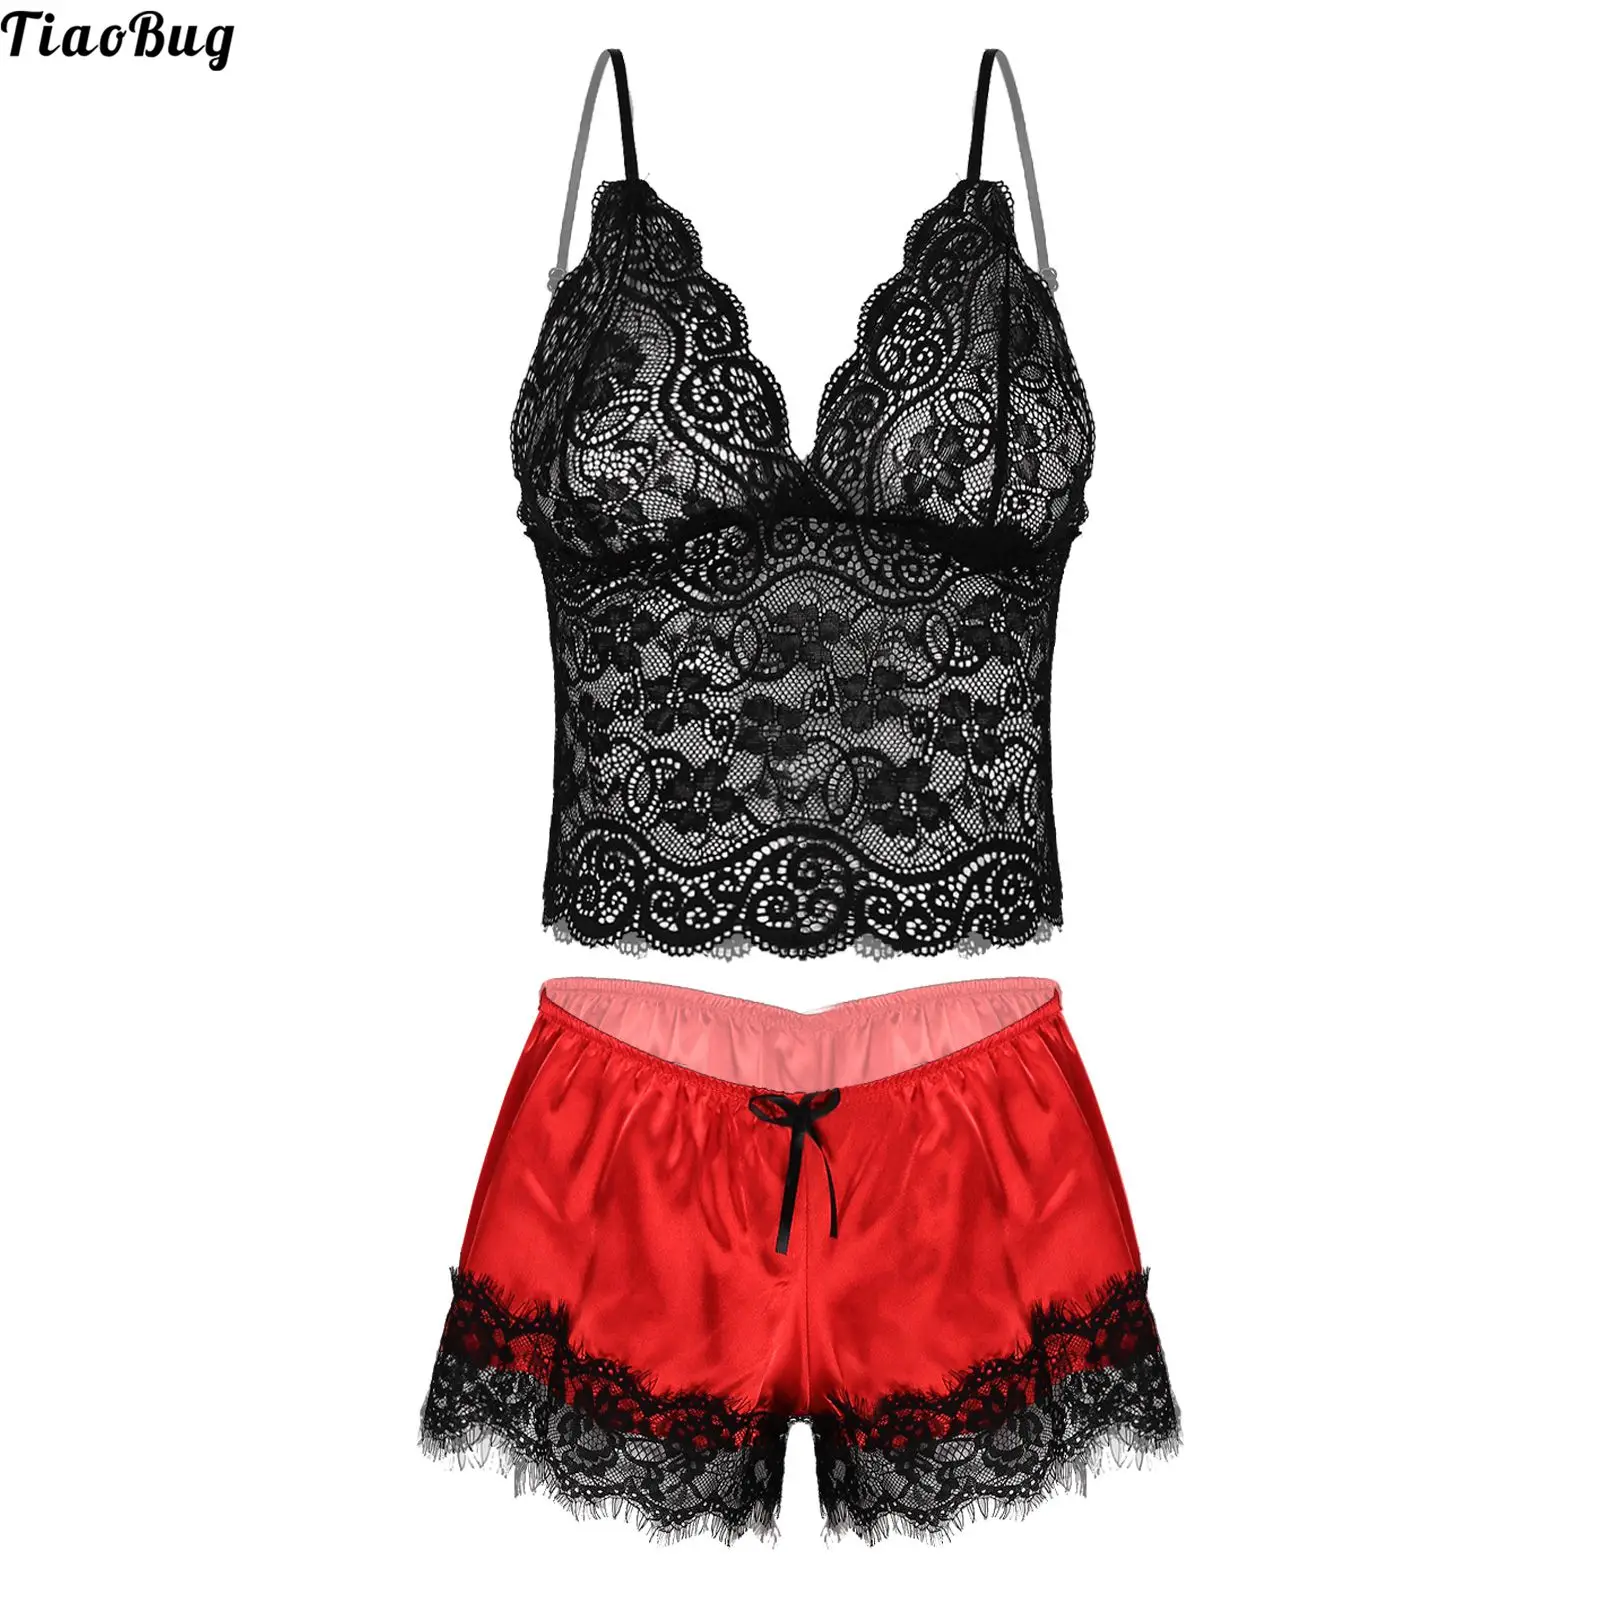 

TiaoBug Summer Women Lady 2Pcs See-Through Lace Lingerie Suit Pajama Set Sleepwear Homewear Cropped Camisole With Shorts